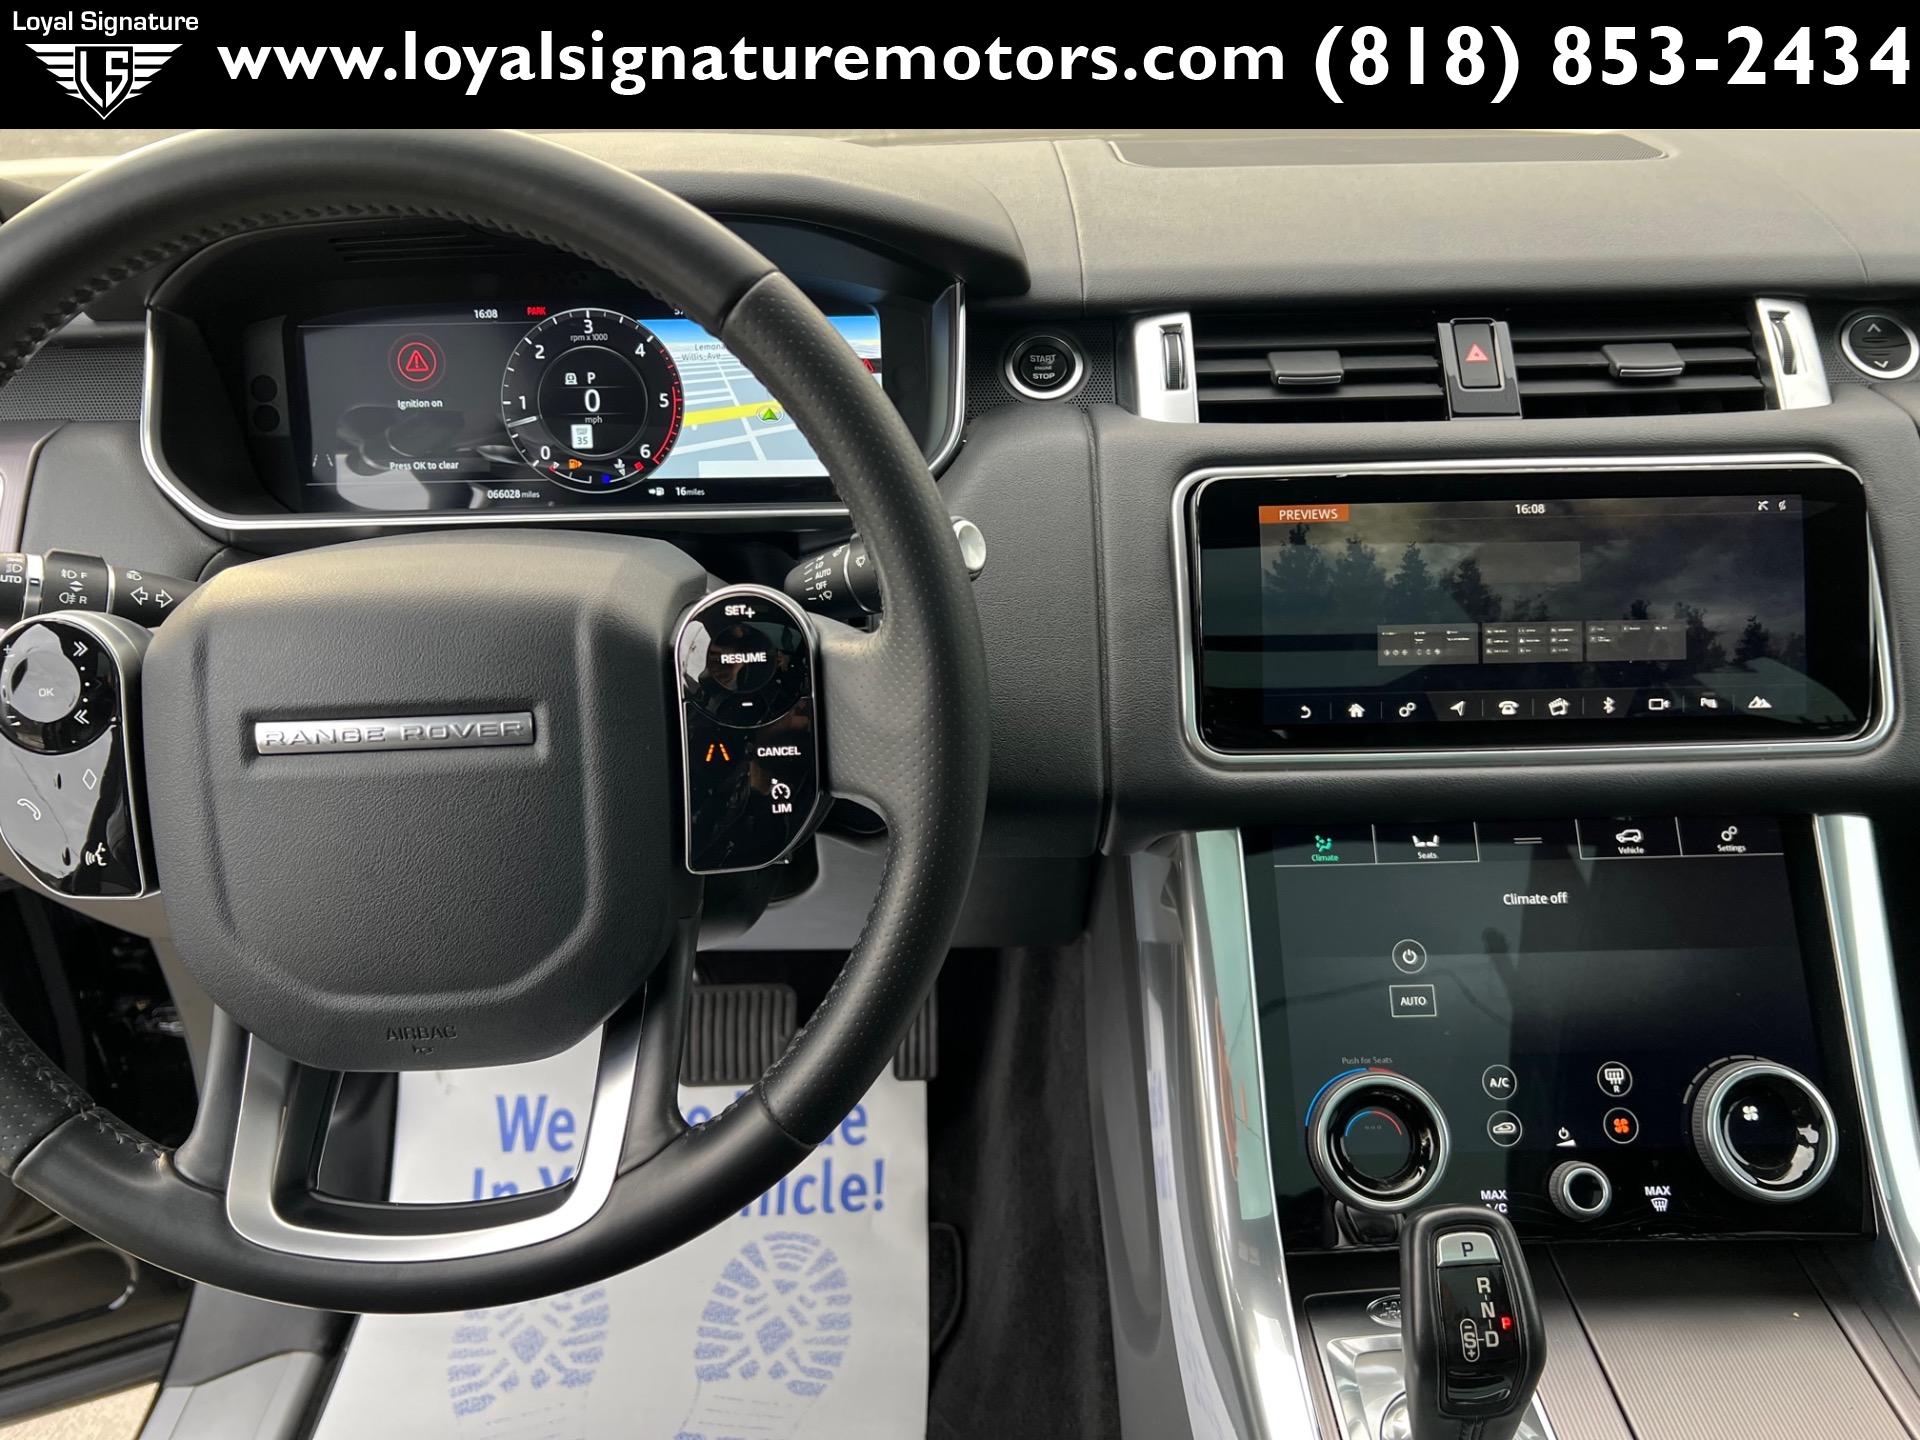 Used-2018-Land-Rover-Range-Rover-Sport-HSE-Td6